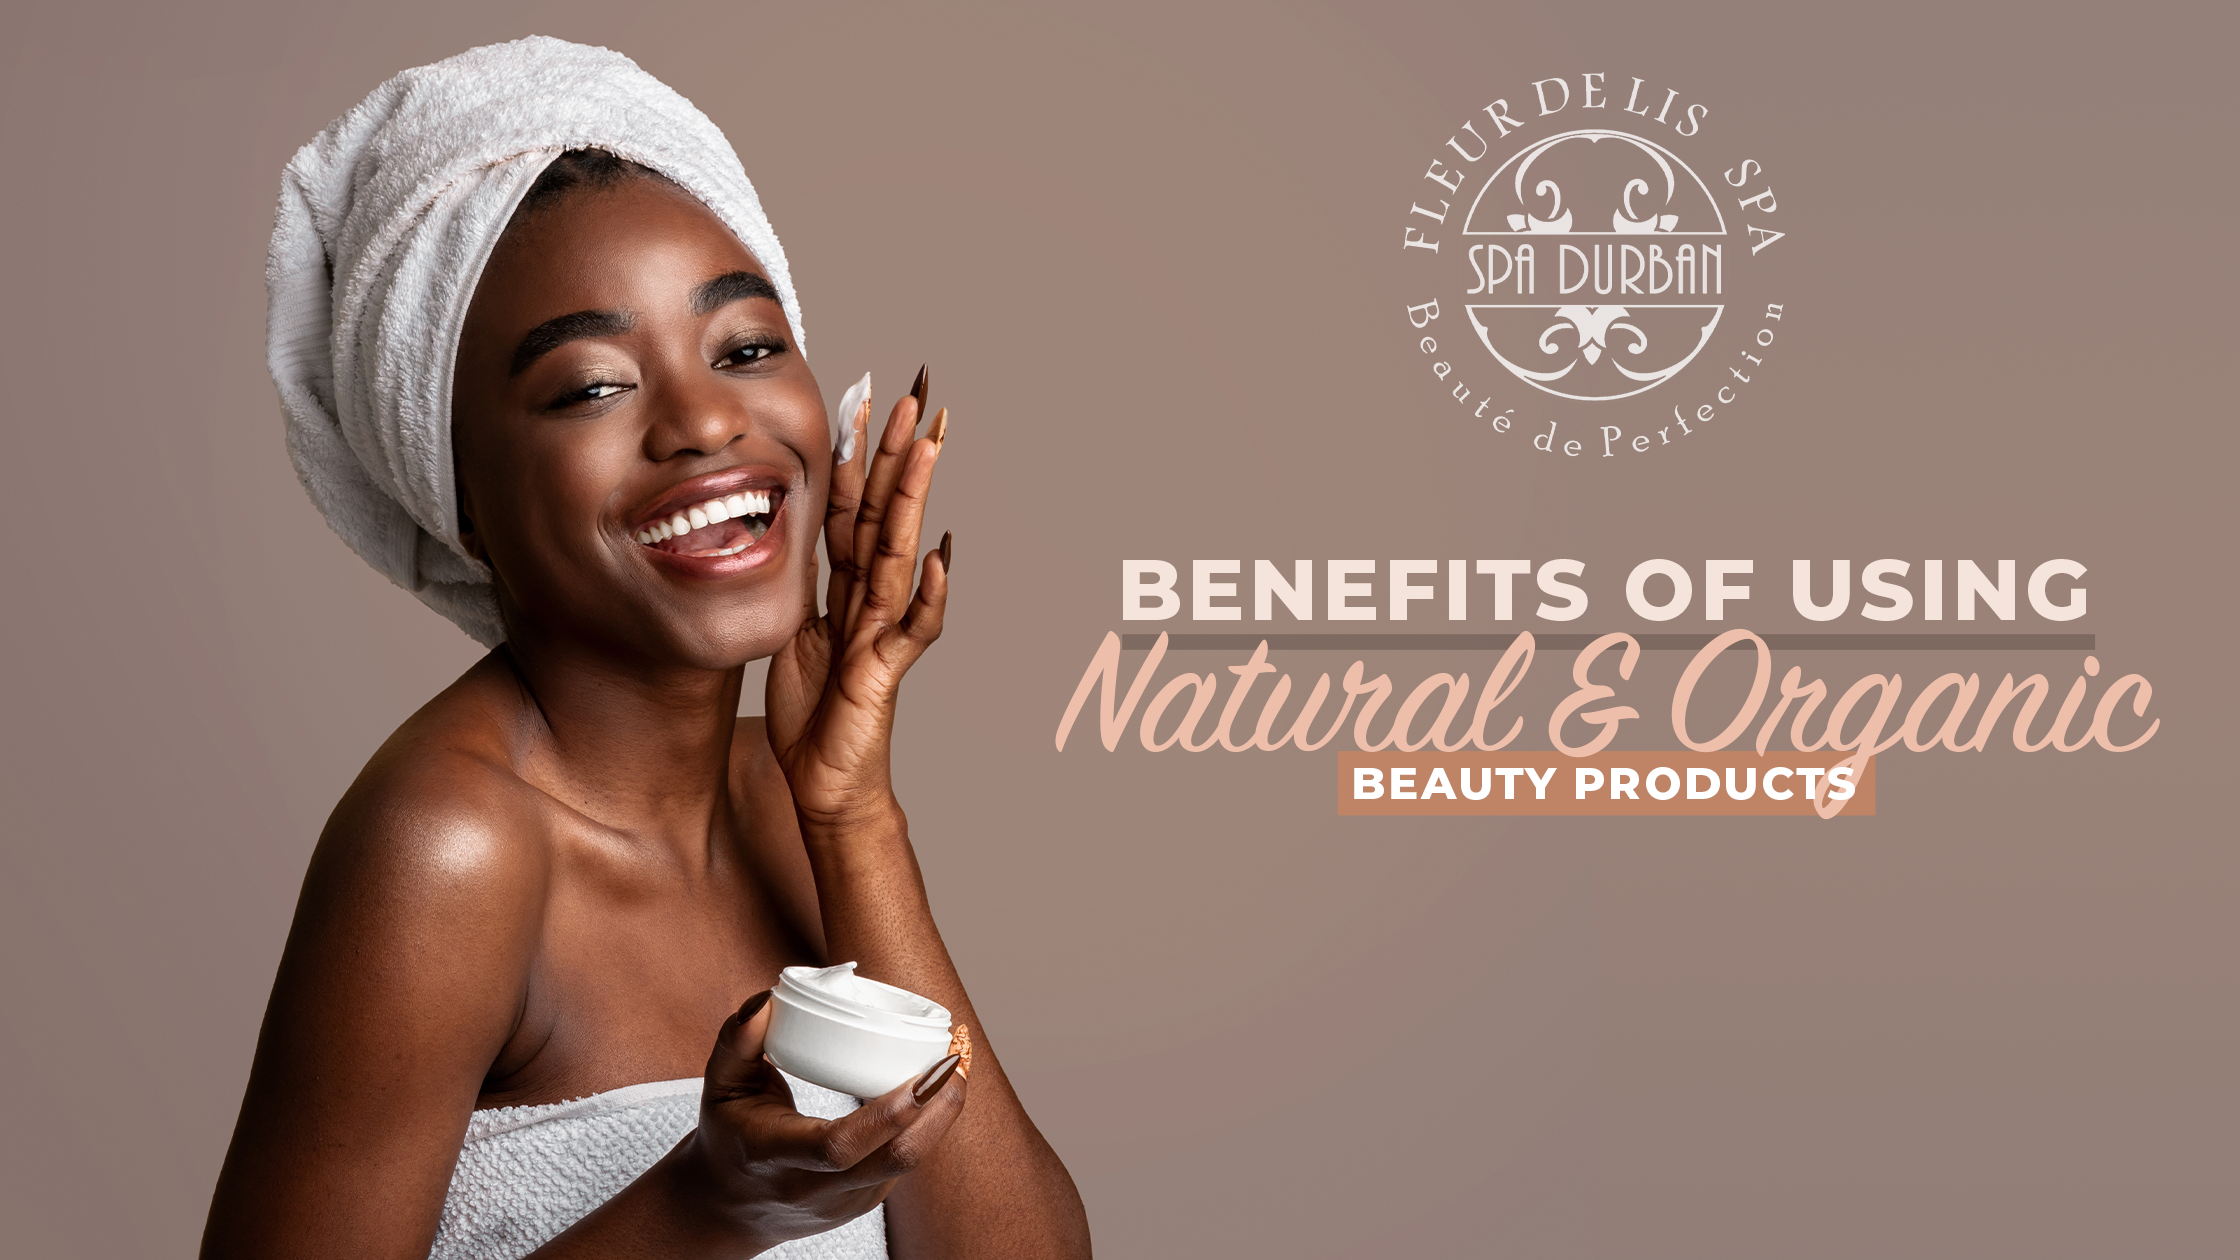 The Benefits of Using Natural and Organic Beauty Products